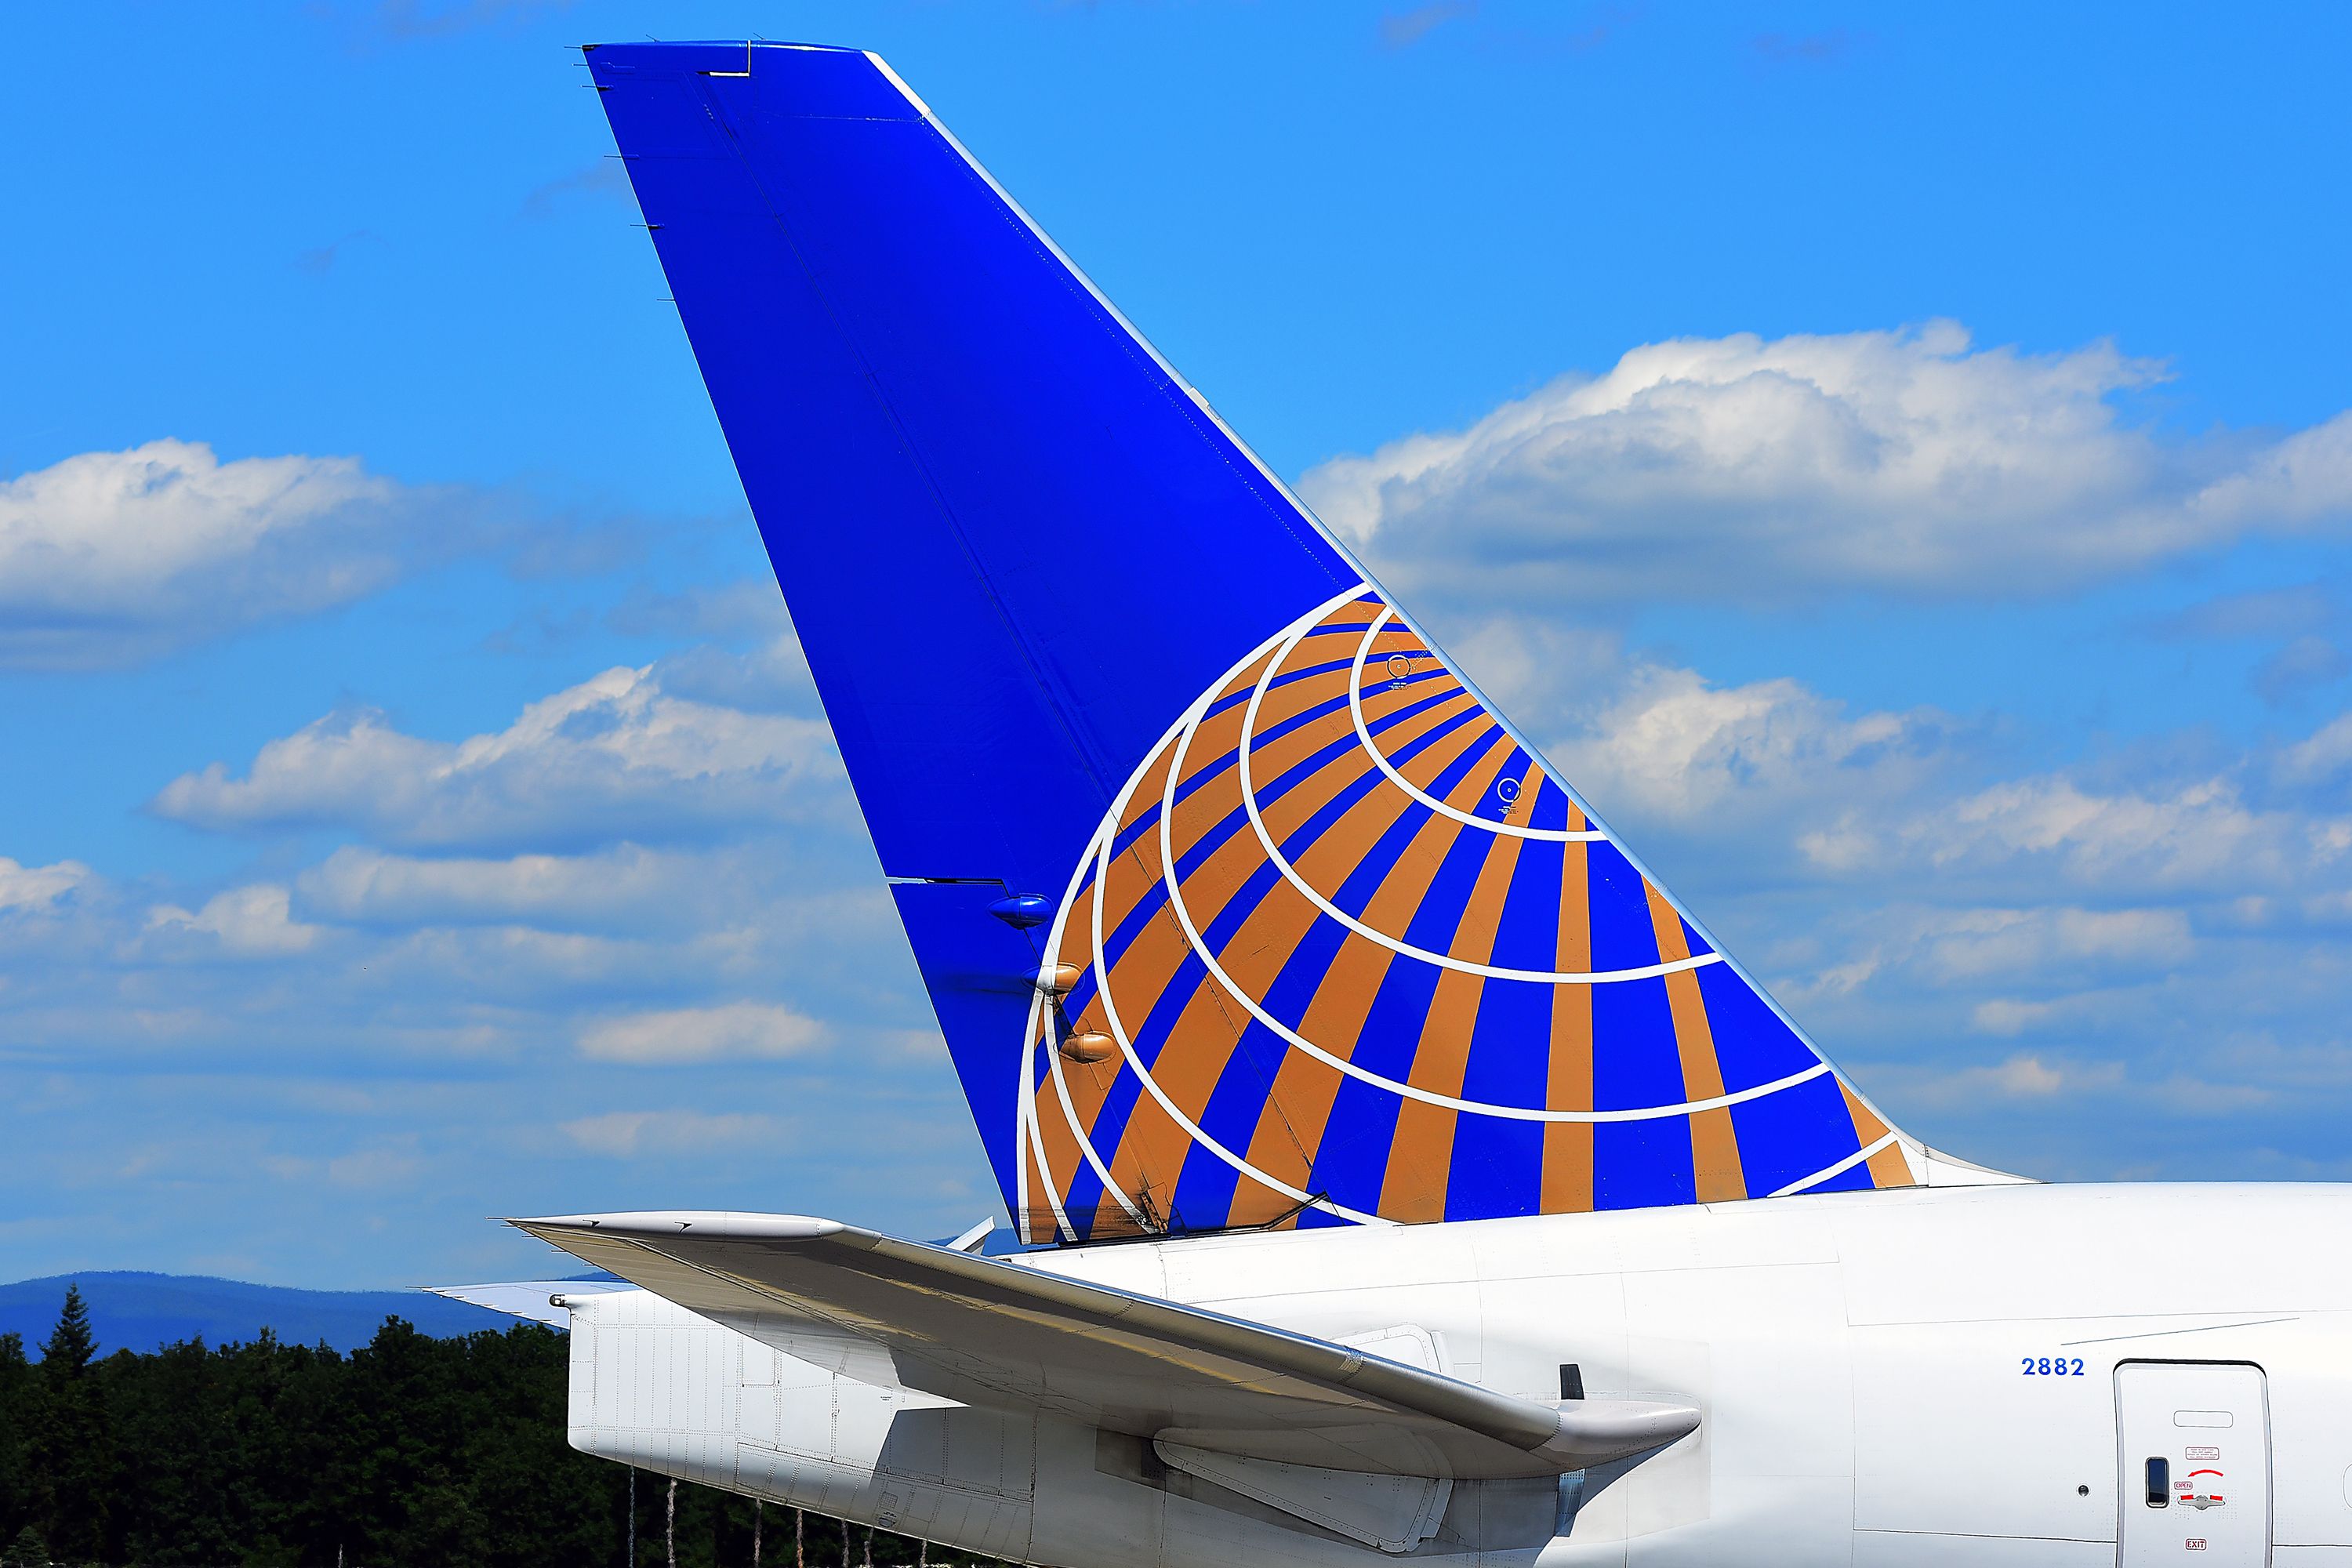 The tail of a United Airlines Aircraft.